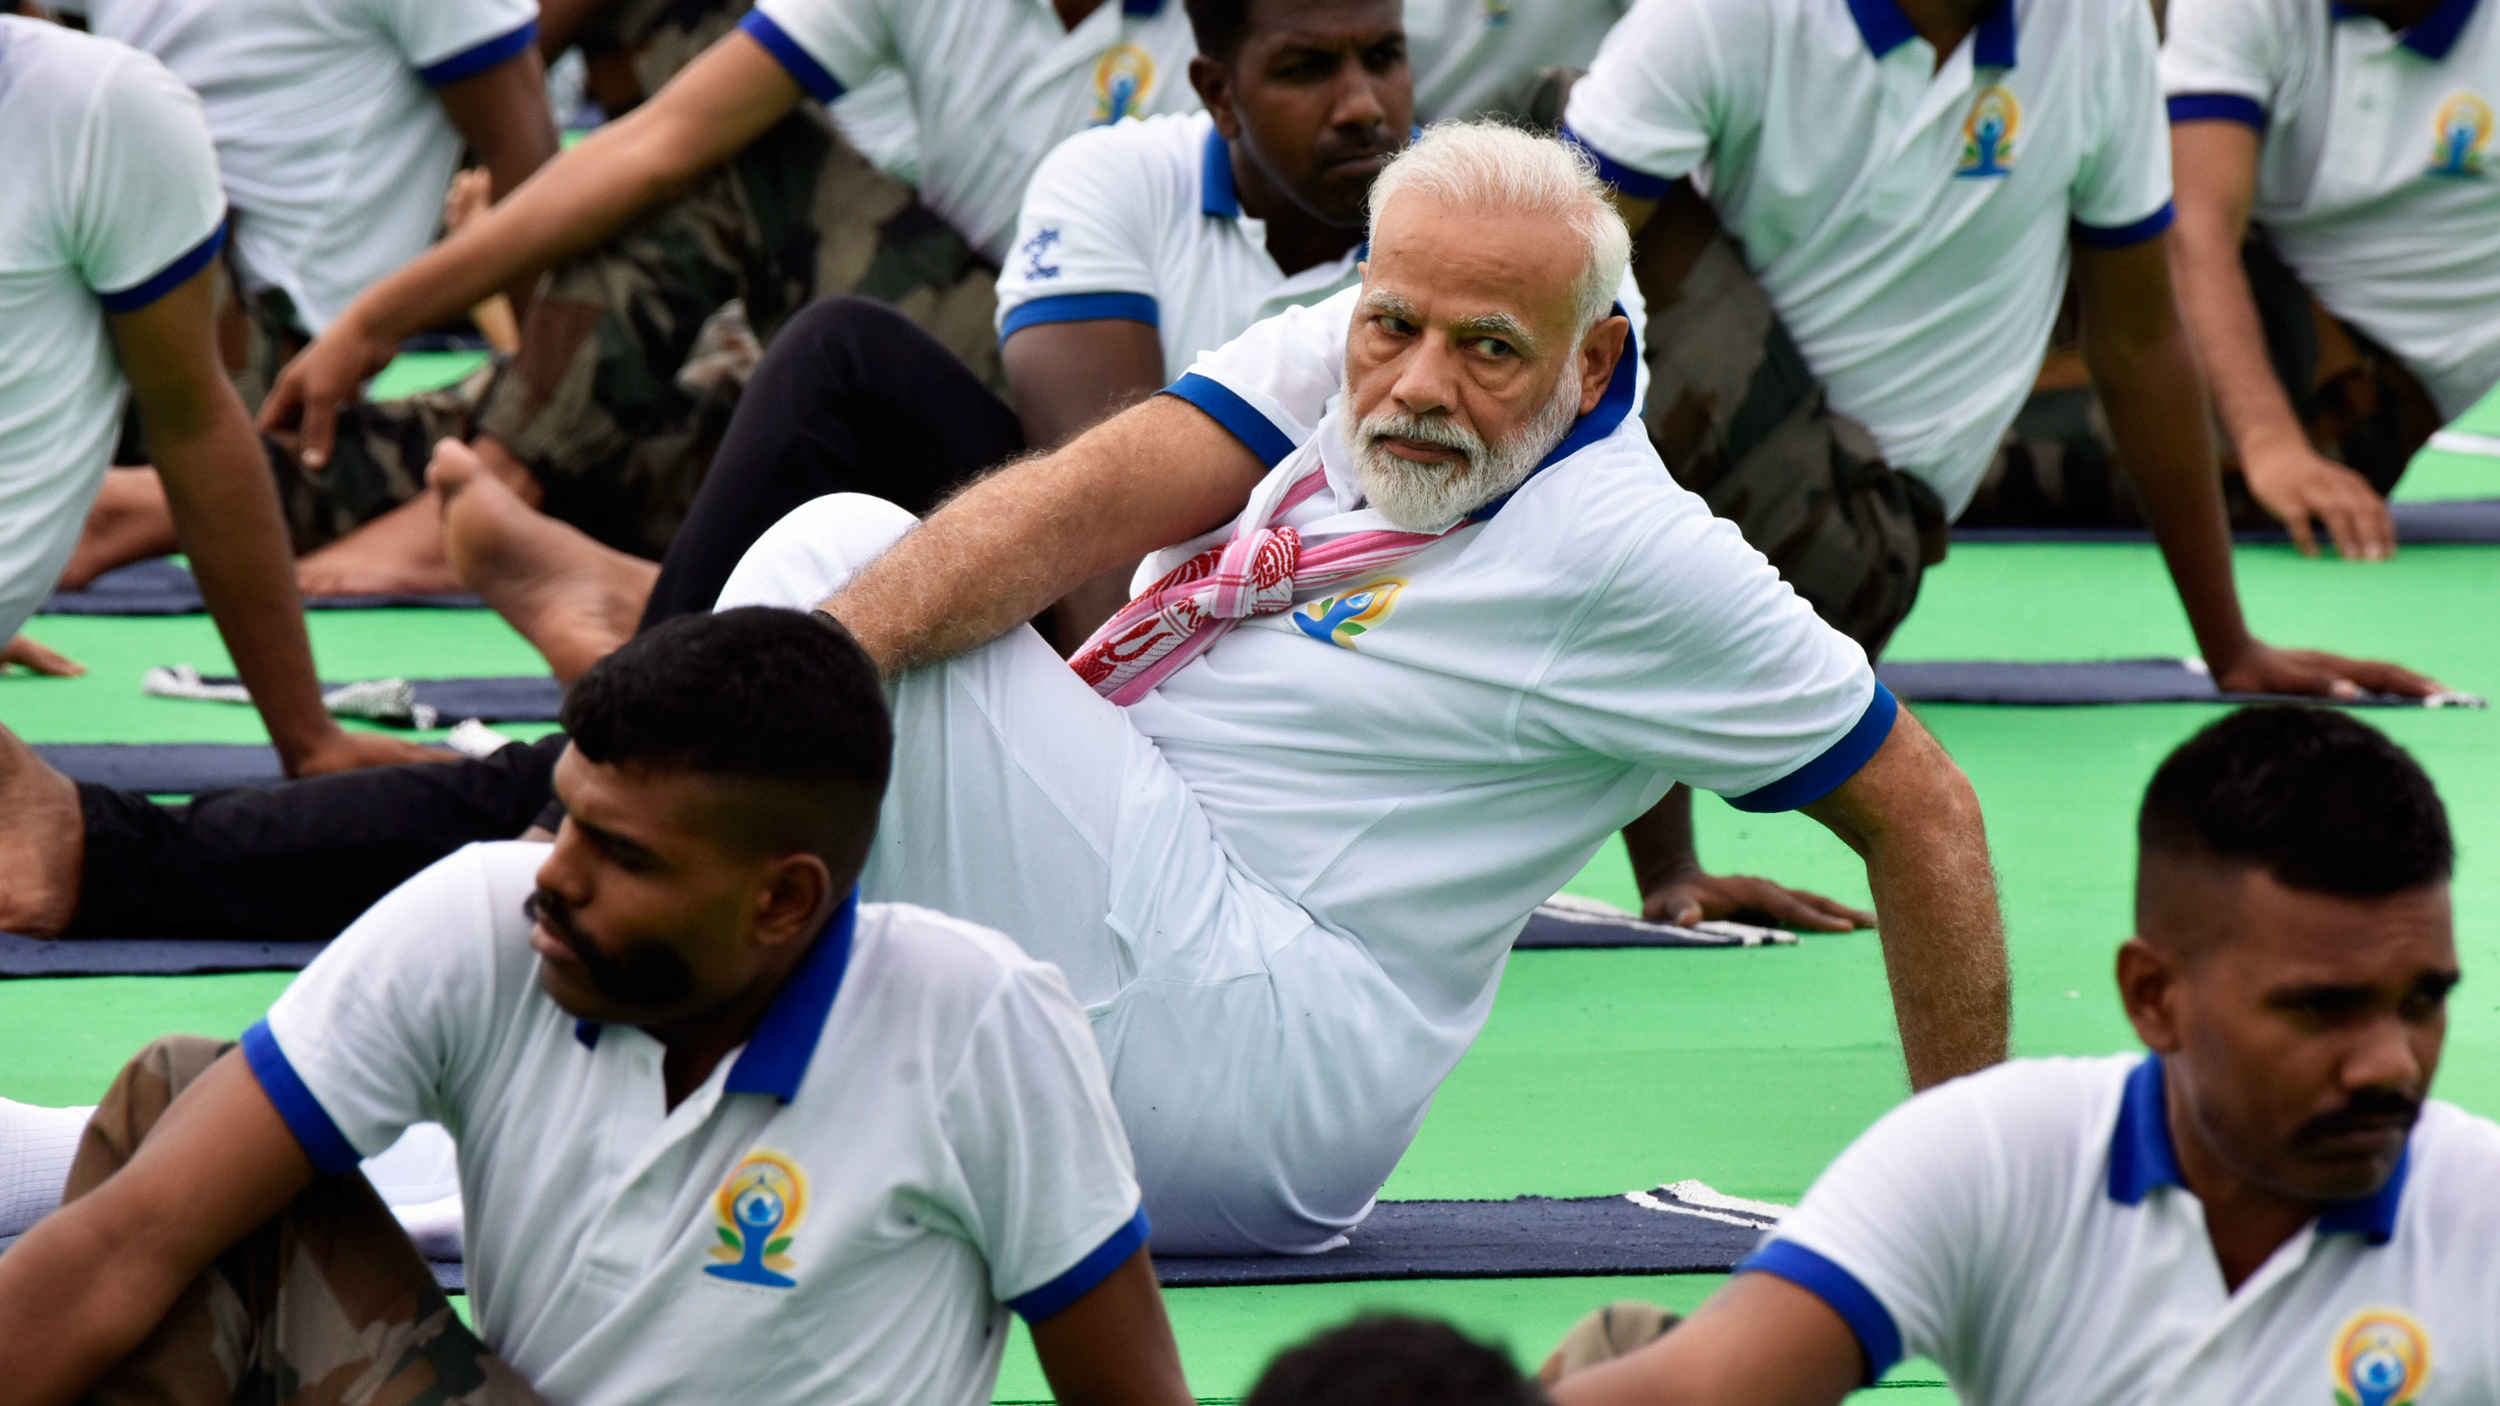 Prime Minister Narendra Modi during an event to mark International Yoga Day in Ranchi on Friday, June 21, 2019.